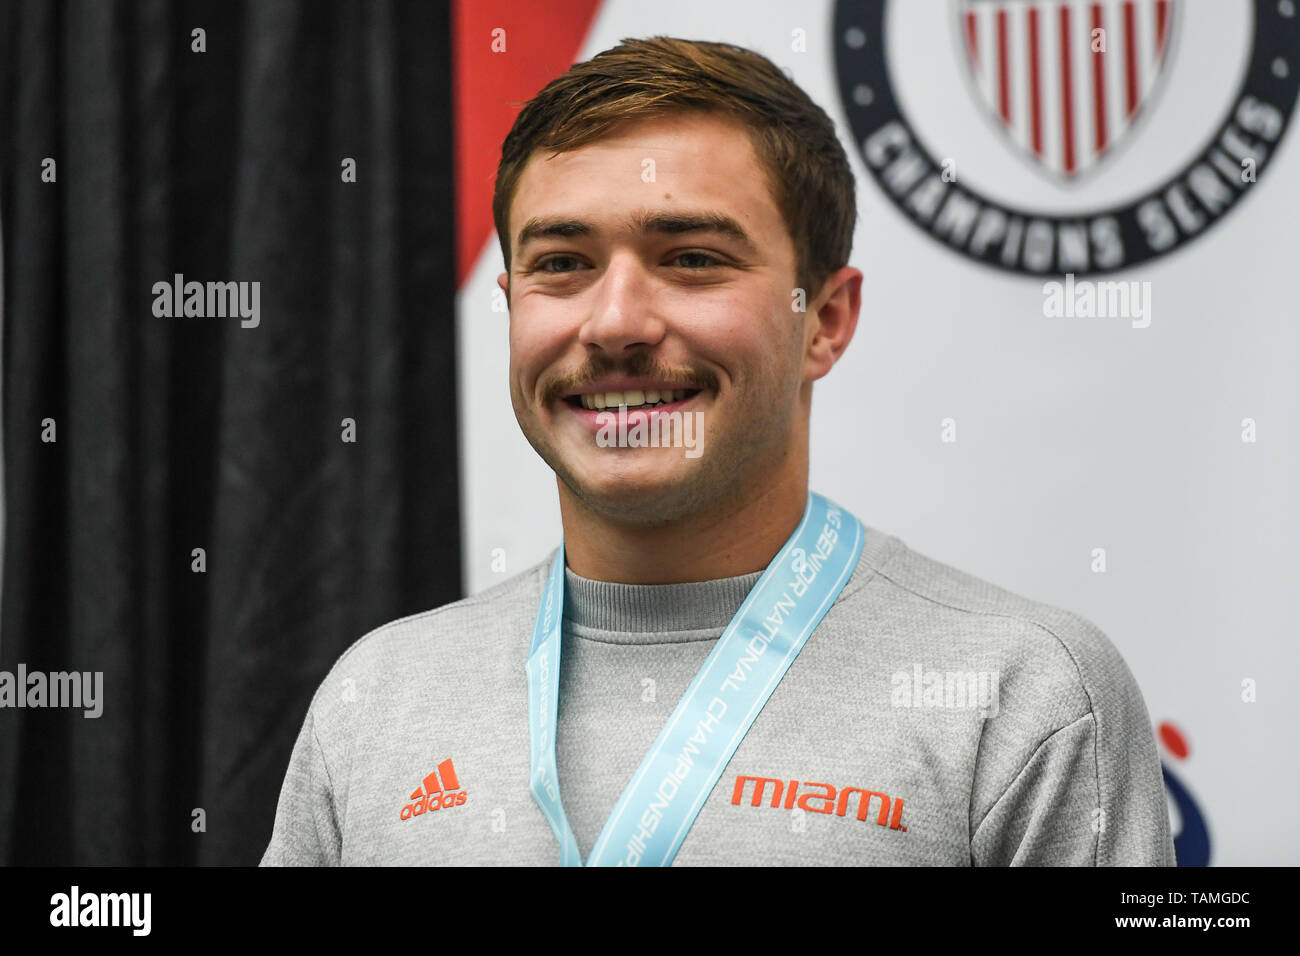 Indianapolis, Indiana, USA. 26th May, 2019. DAVID DINSMORE from the  University of Miami smiles on the awards podium at the University of Indiana  Natatorium in Indianapolis, Indiana. Credit: Amy Sanderson/ZUMA Wire/Alamy  Live